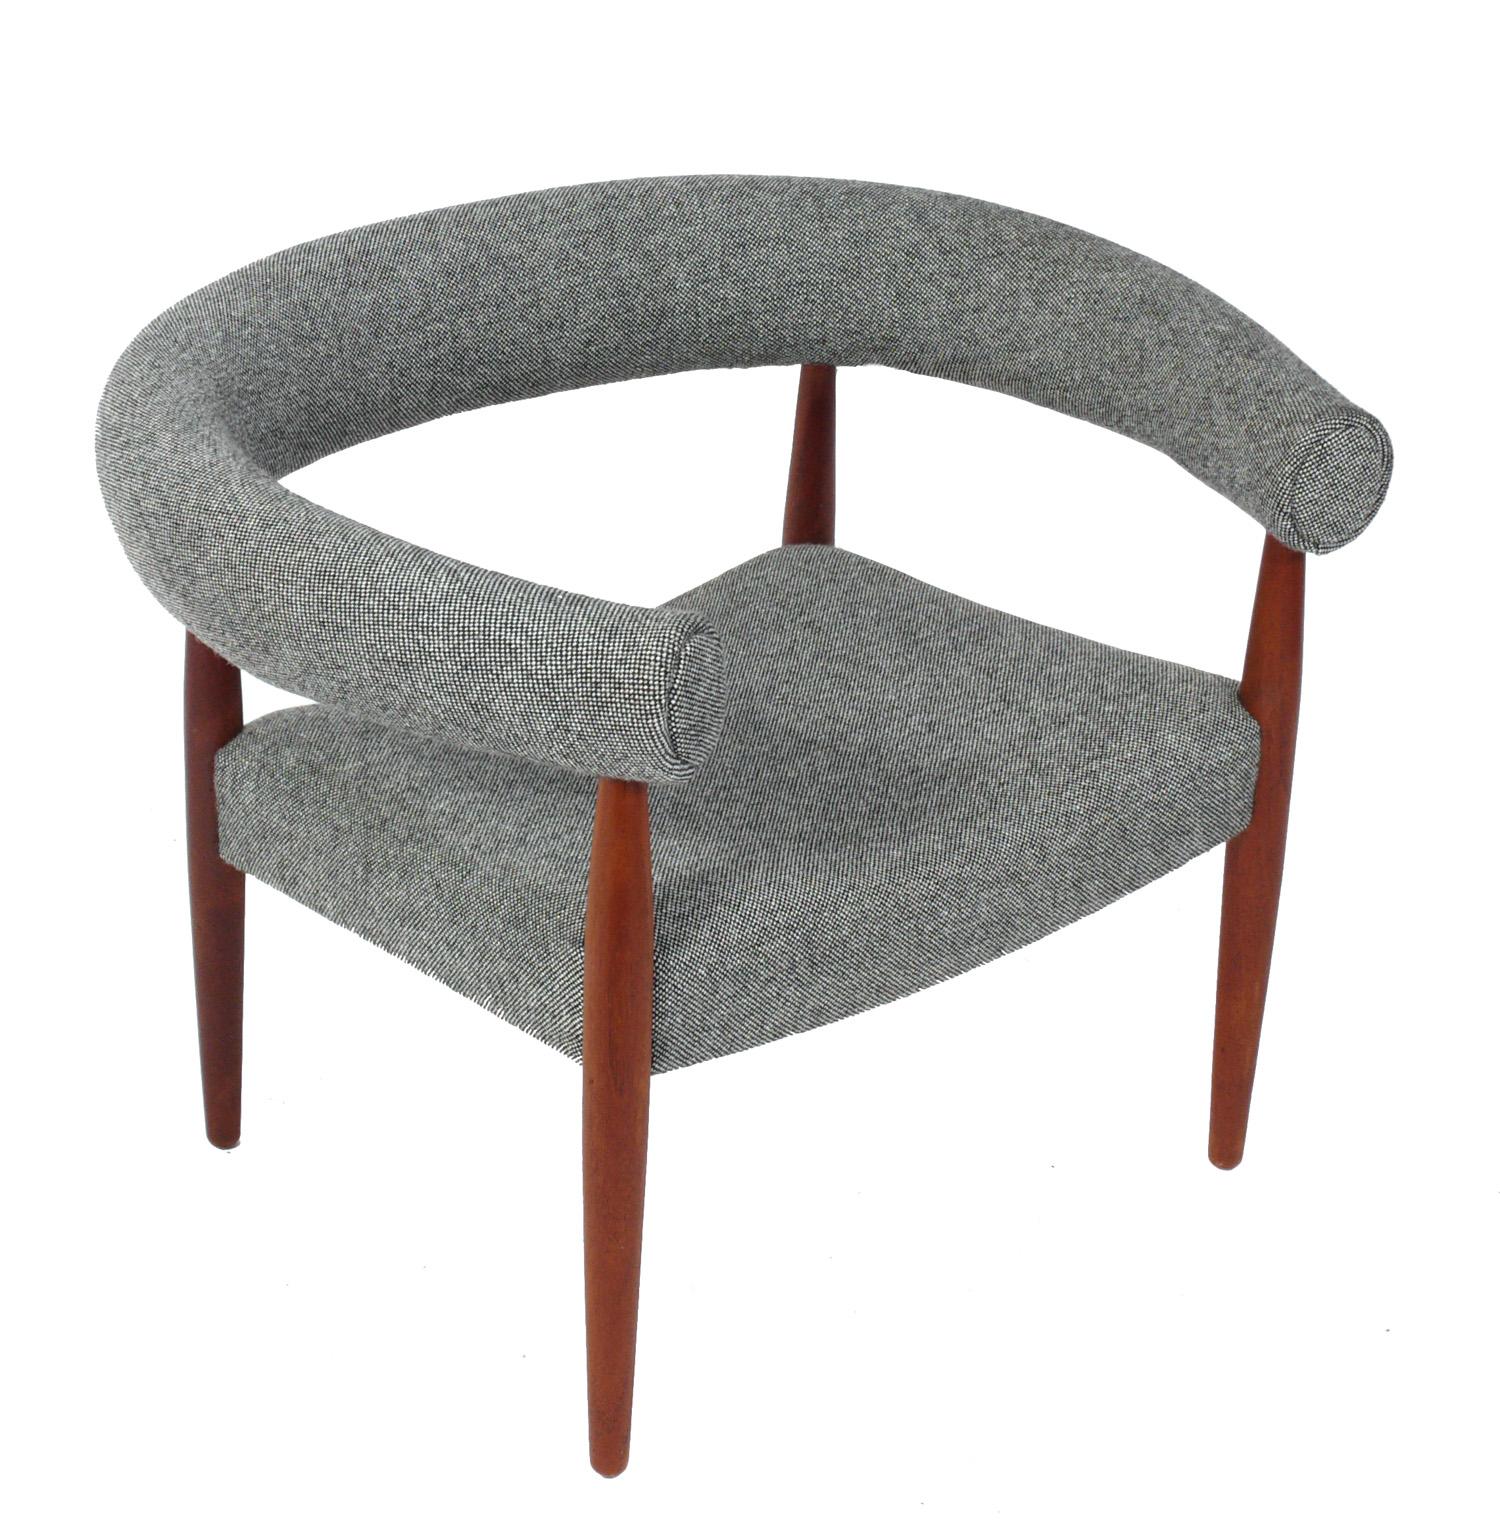 Sculptural vintage ring lounge chair, designed by Nanna and Jorgen Ditzel for Denmark, circa 1960s. It has recently been reupholstered in a micro-check black and white Maharam fabric, and the teak frame has been recently cleaned and Danish oiled.